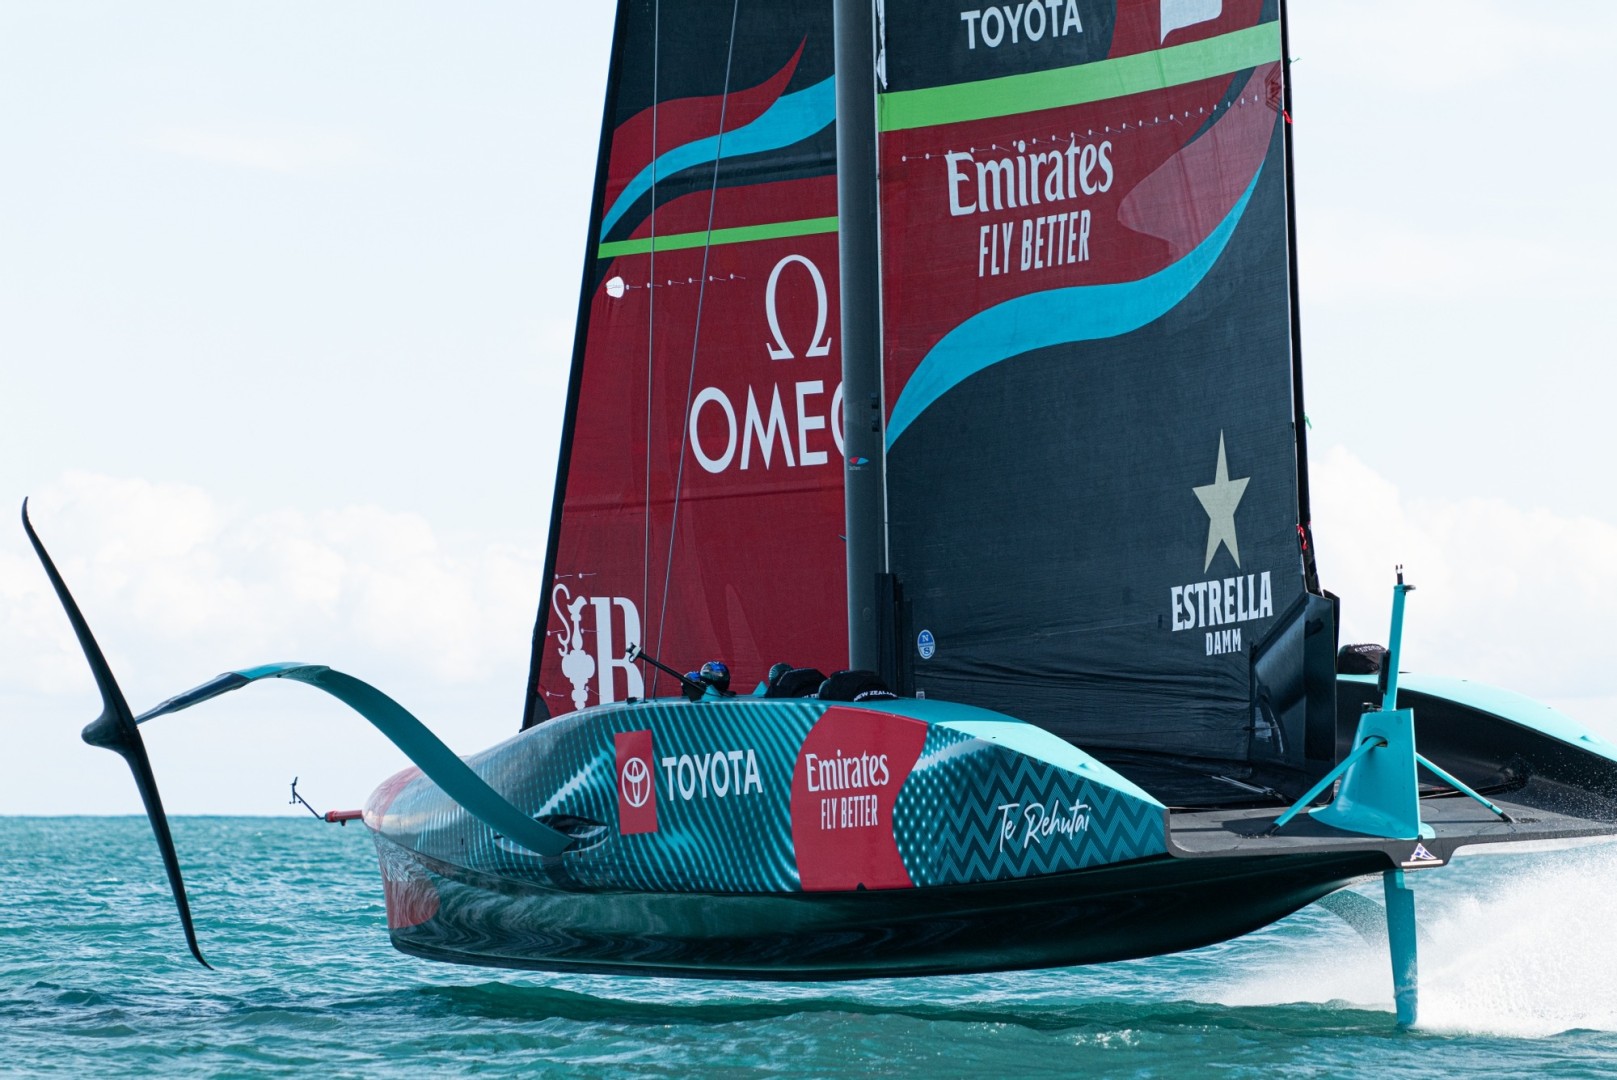 America's Cup, tricky conditions in Barcelona for the AC75 boats